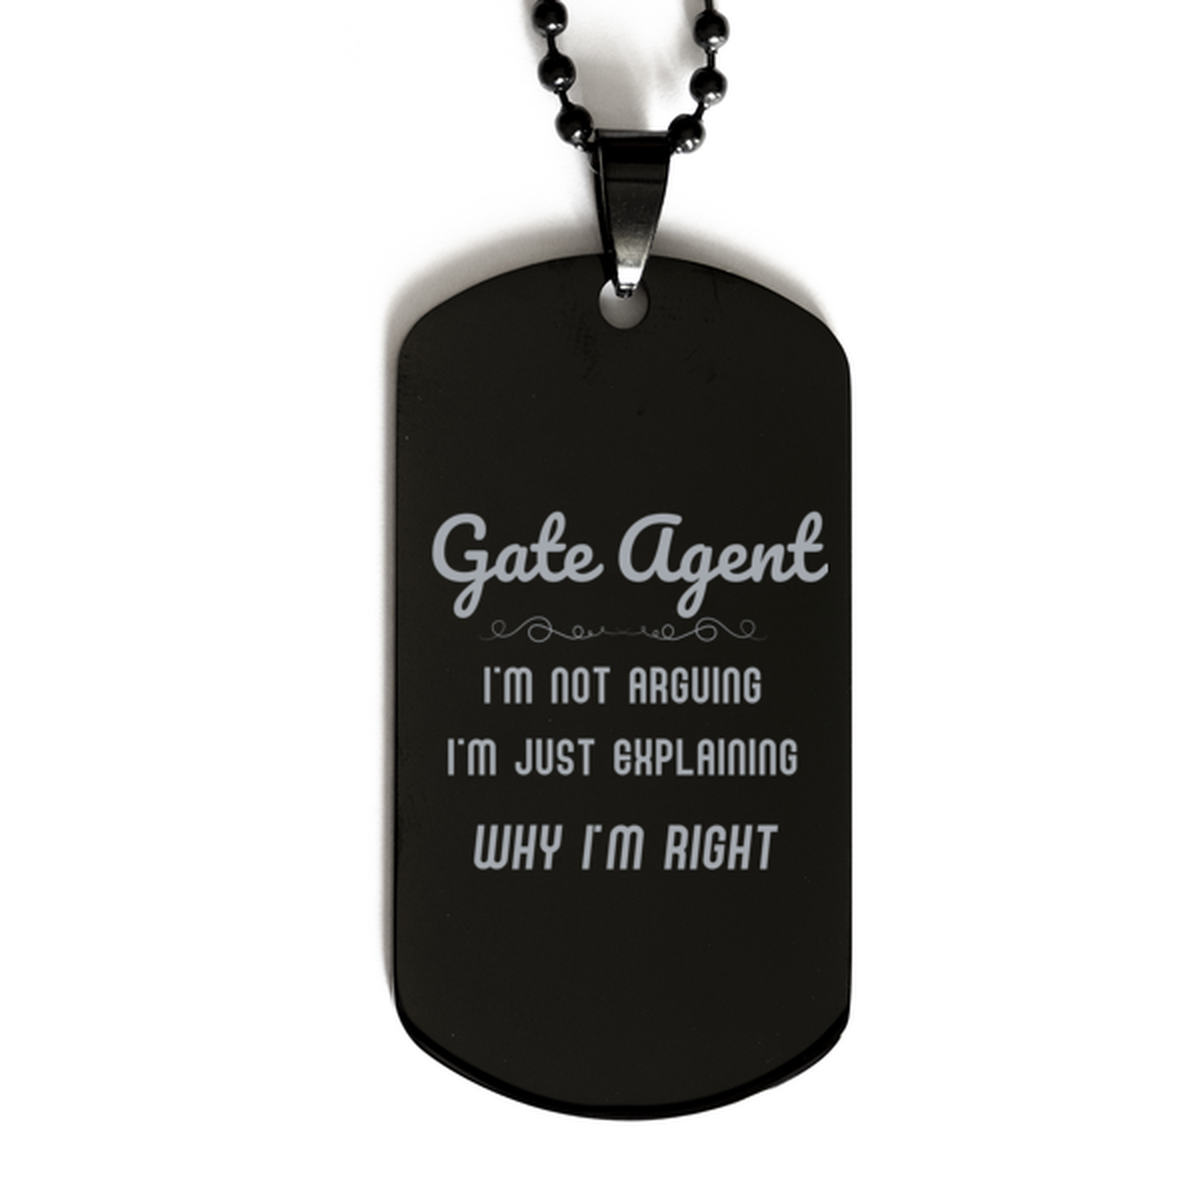 Gate Agent I'm not Arguing. I'm Just Explaining Why I'm RIGHT Black Dog Tag, Funny Saying Quote Gate Agent Gifts For Gate Agent Graduation Birthday Christmas Gifts for Men Women Coworker